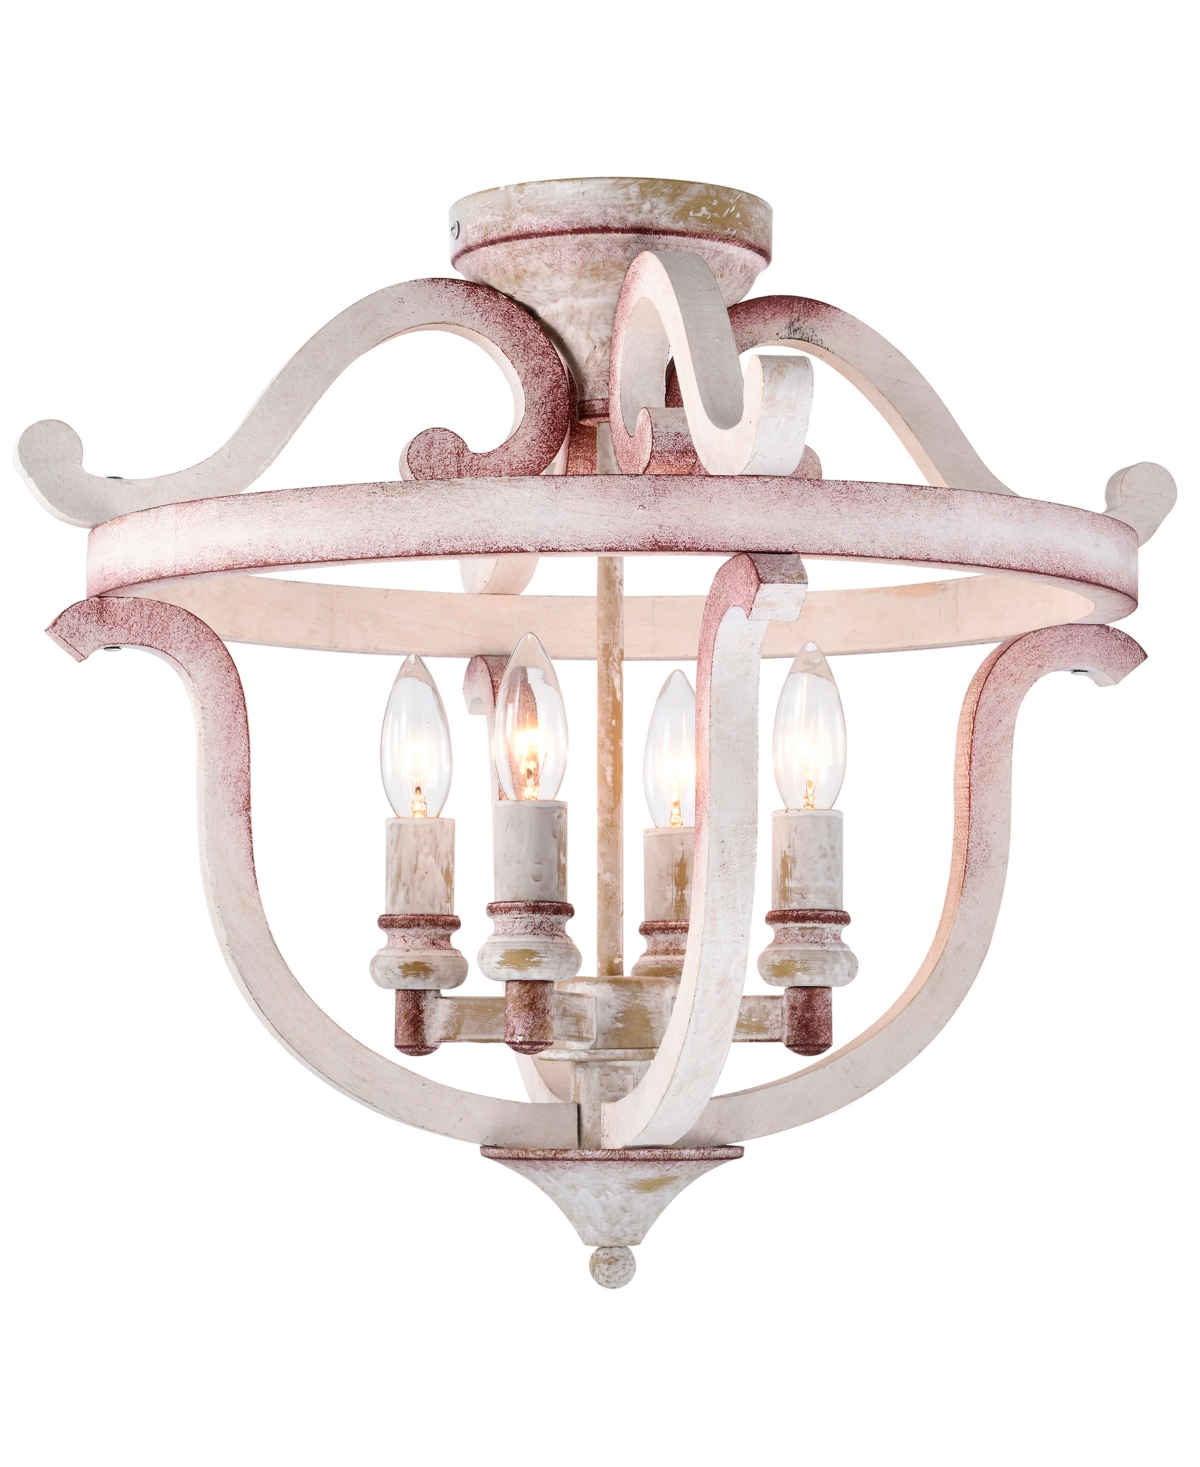 Home Accessories Momali 20" 4-light Indoor Finish Flush Mount With Light Kit In Weathered White And Weathered Pink